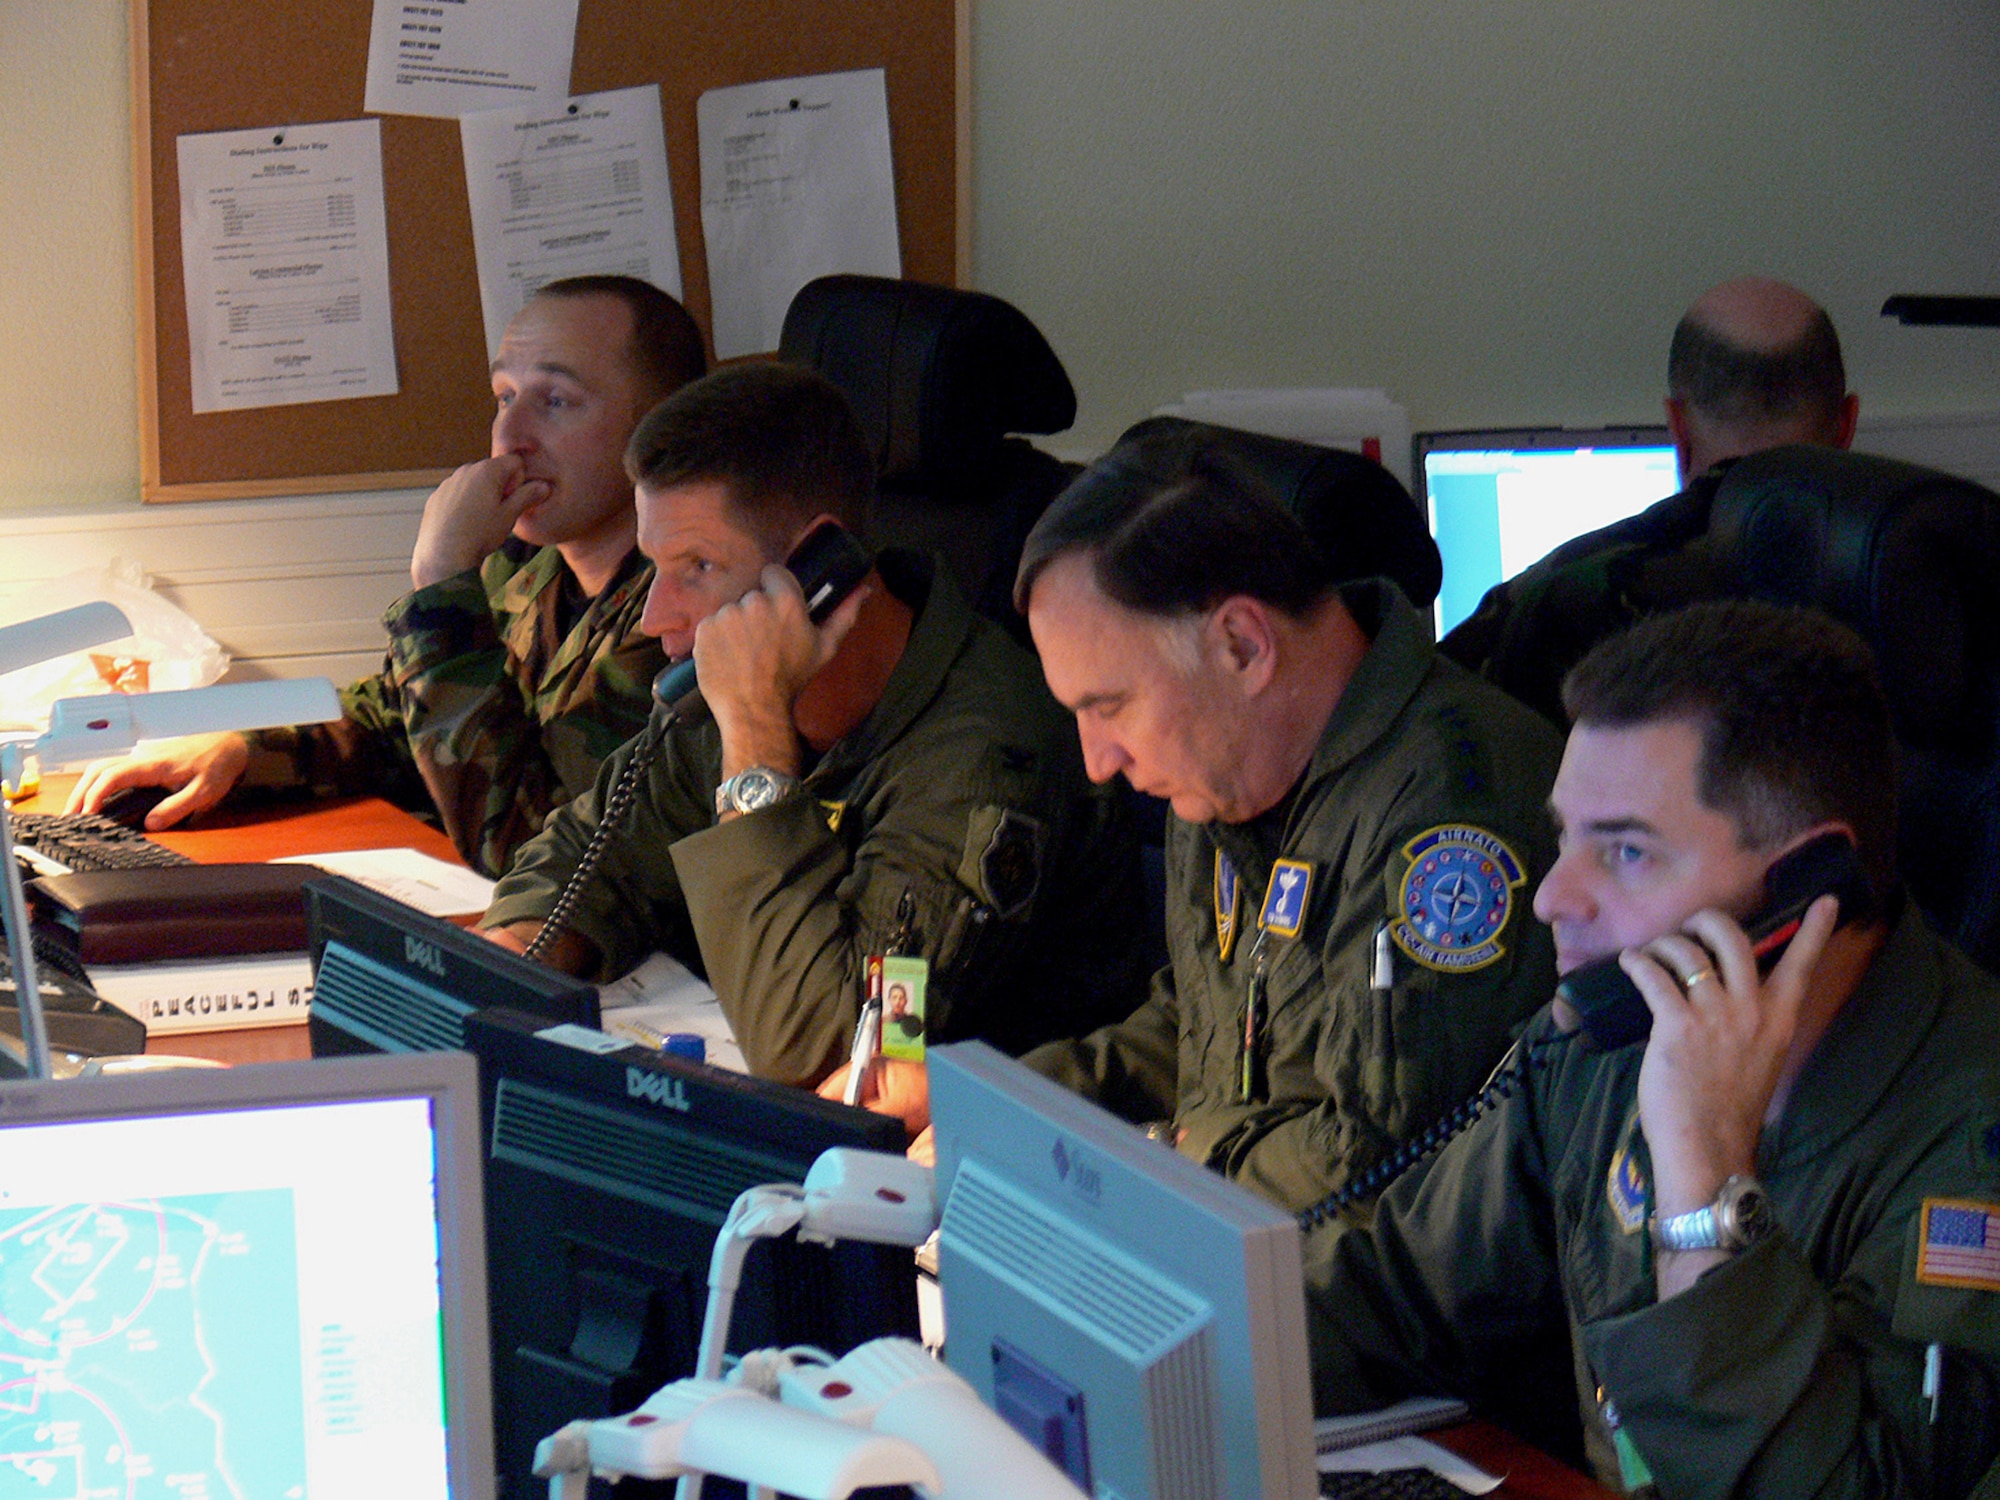 Gen. William T. Hobbins (center right) leads the Combined Joint Air Operations Center team monitoring the skies over the Baltics during NATO's Riga Summit in Latvia Nov. 28 and 29. General Hobbins is the U.S. Air Forces in Europe commander and commander, NATO Air Component Command Ramstein. Others in the photo include, from left, Maj. B.J. Cottrell, legal advisor, Col. Pete Castor, 322 Air Expeditionary Group commander, and Lt. Col. David Jorgensen, NATO/U.S. watch advisor. Members from thoughout USAFE provided fighter, tanker, maintenance and communications support in seven countries, as well as staffing the Combined Joint Air Operations Center in Riga. (U.S. Air Force photo/by Maj. Lisa Neidinger)